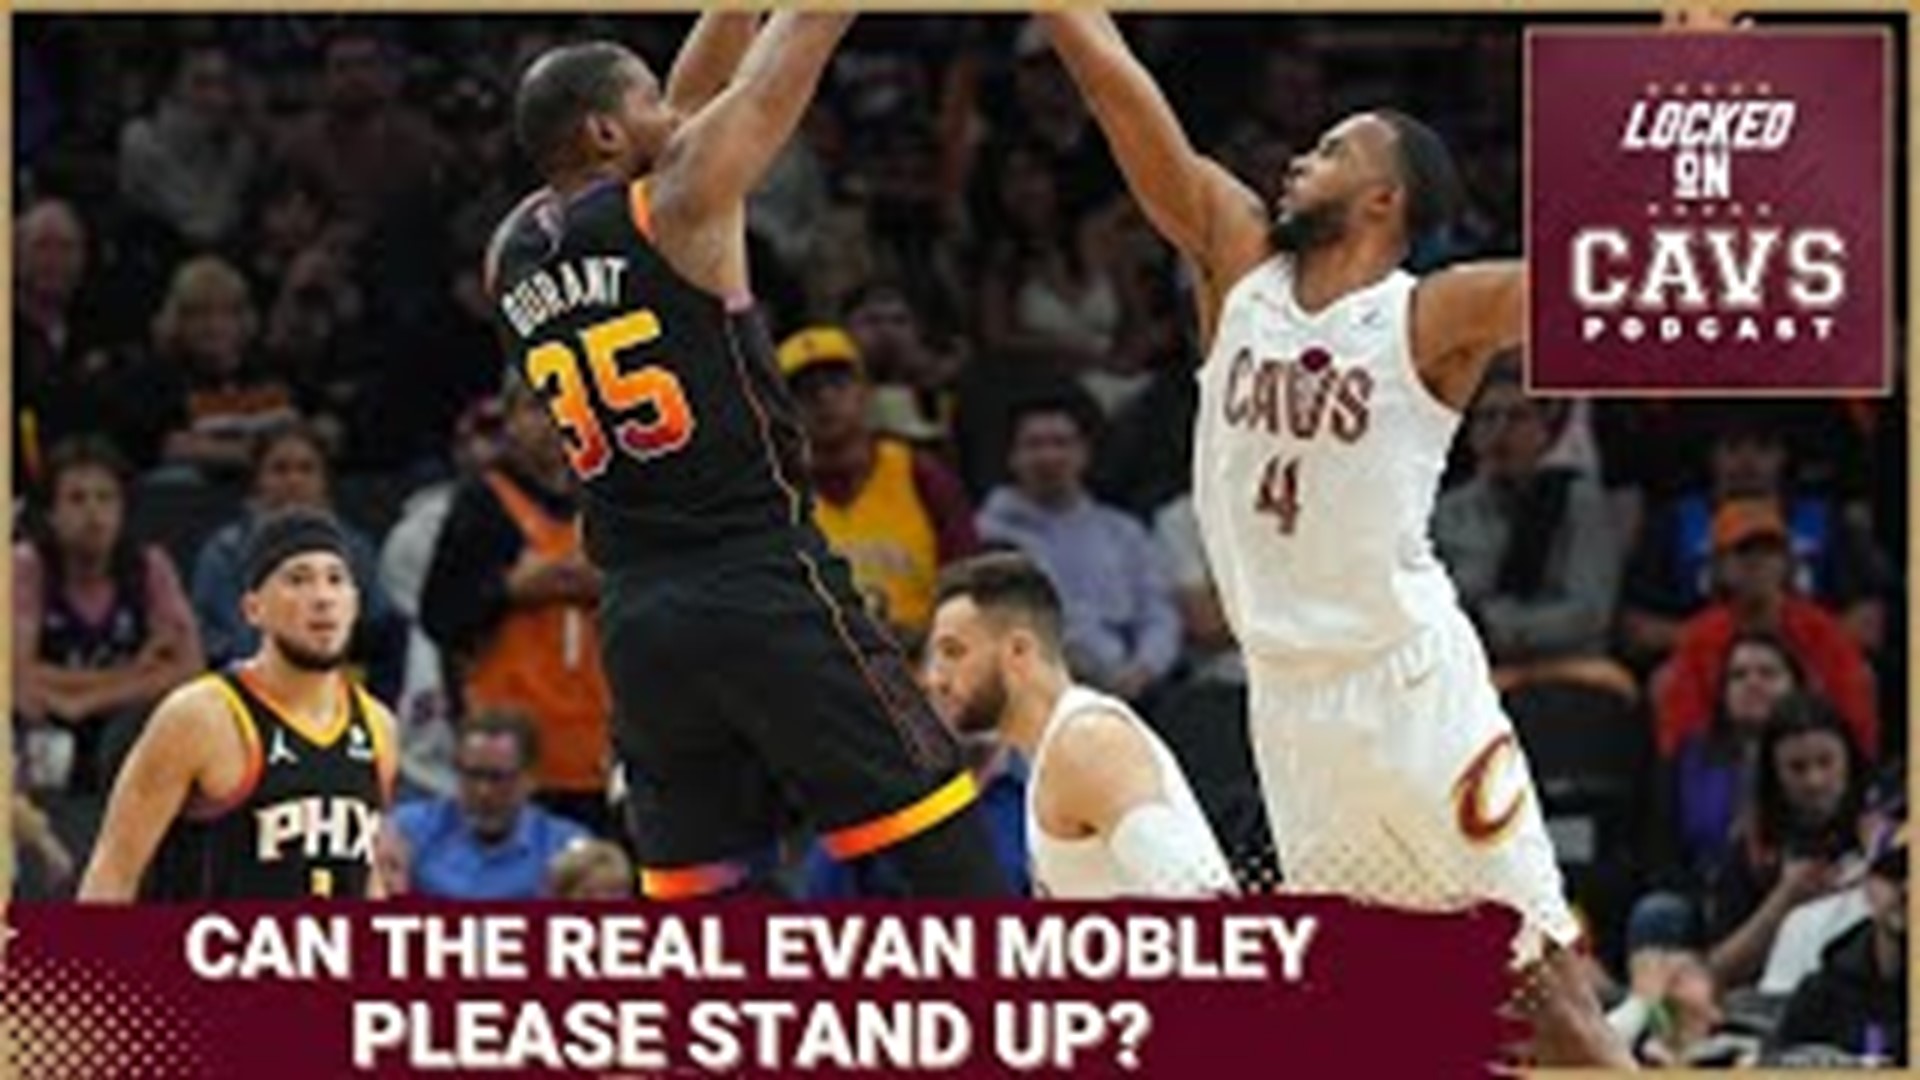 On a new episode of Locked On Cavs host Evan Dammarell discusses what to expect when the Cleveland Cavaliers kick off their playoff run in less than two weeks.